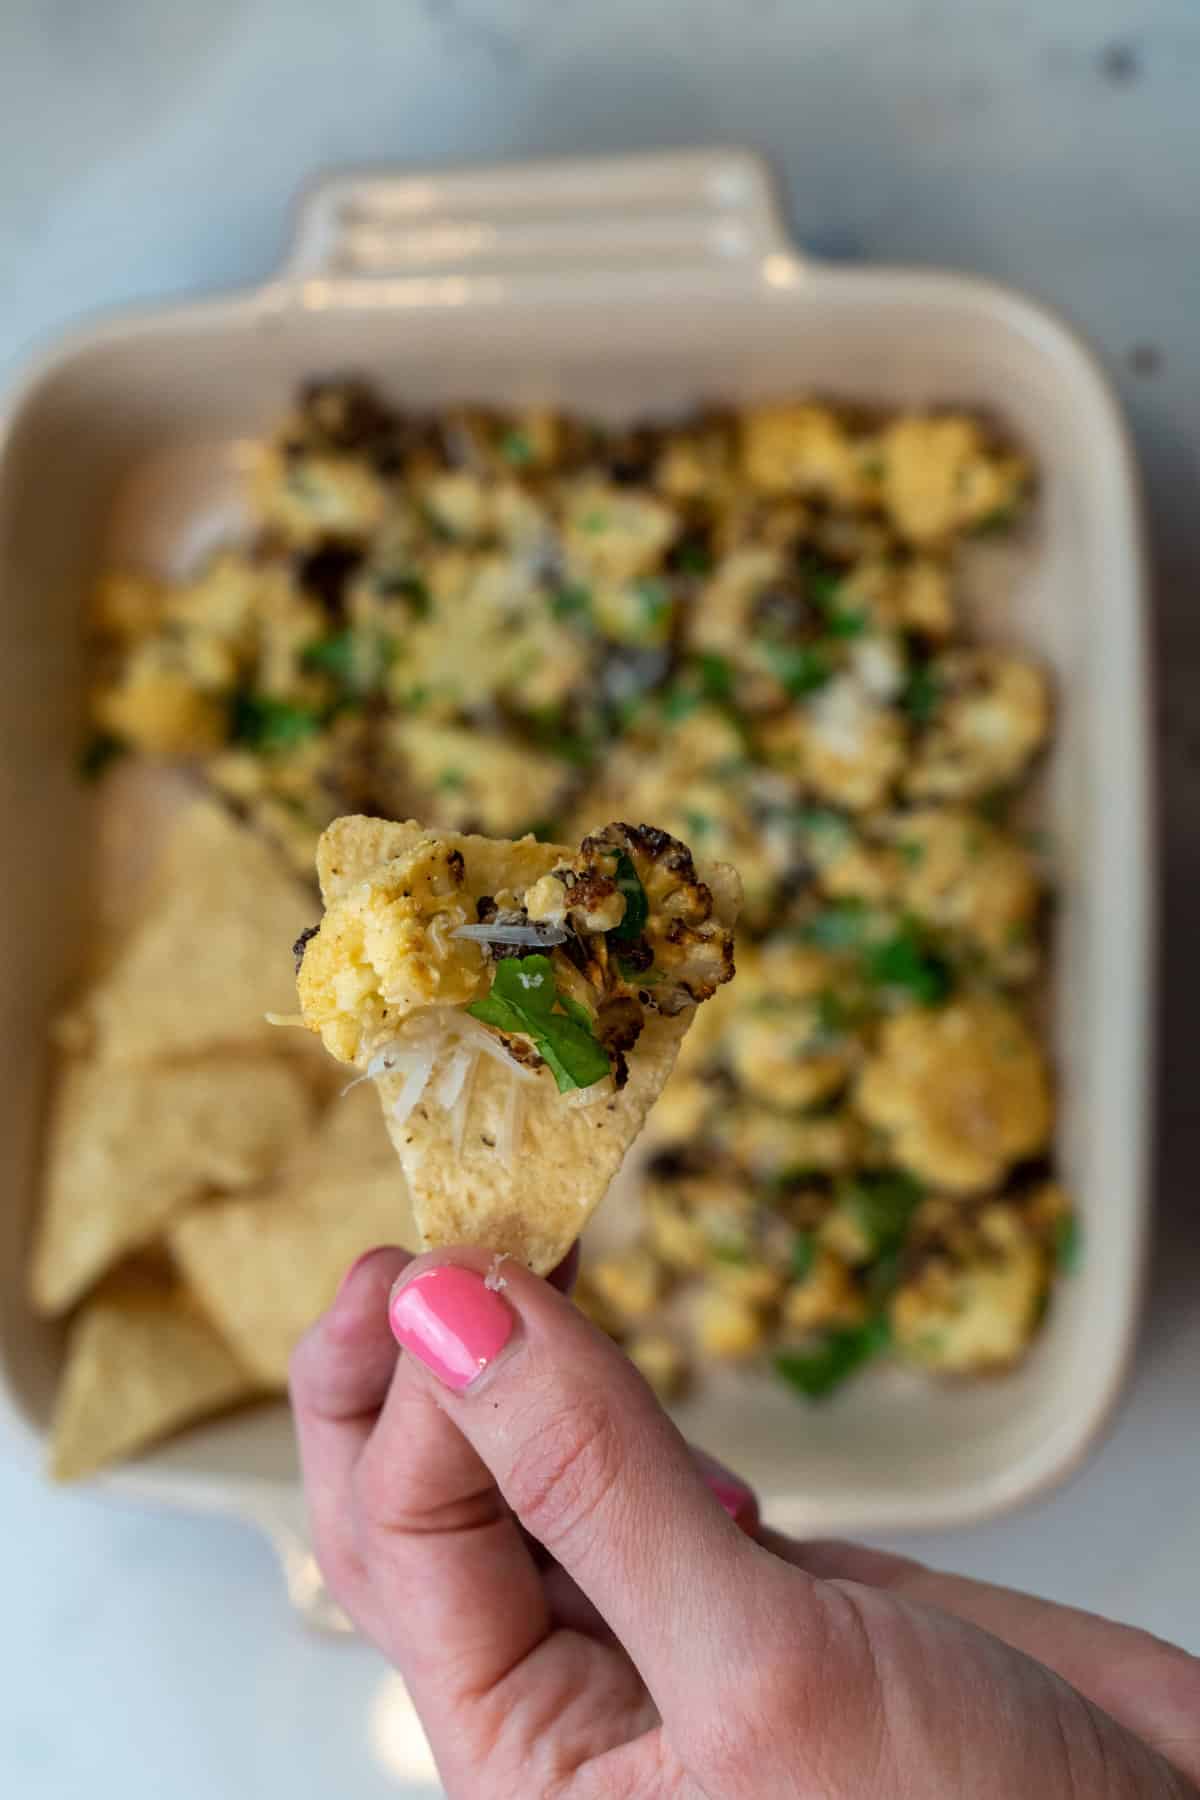 Plate the Mexican cauliflower and top with the extra cheese and cilantro. Serve with tortilla chips.